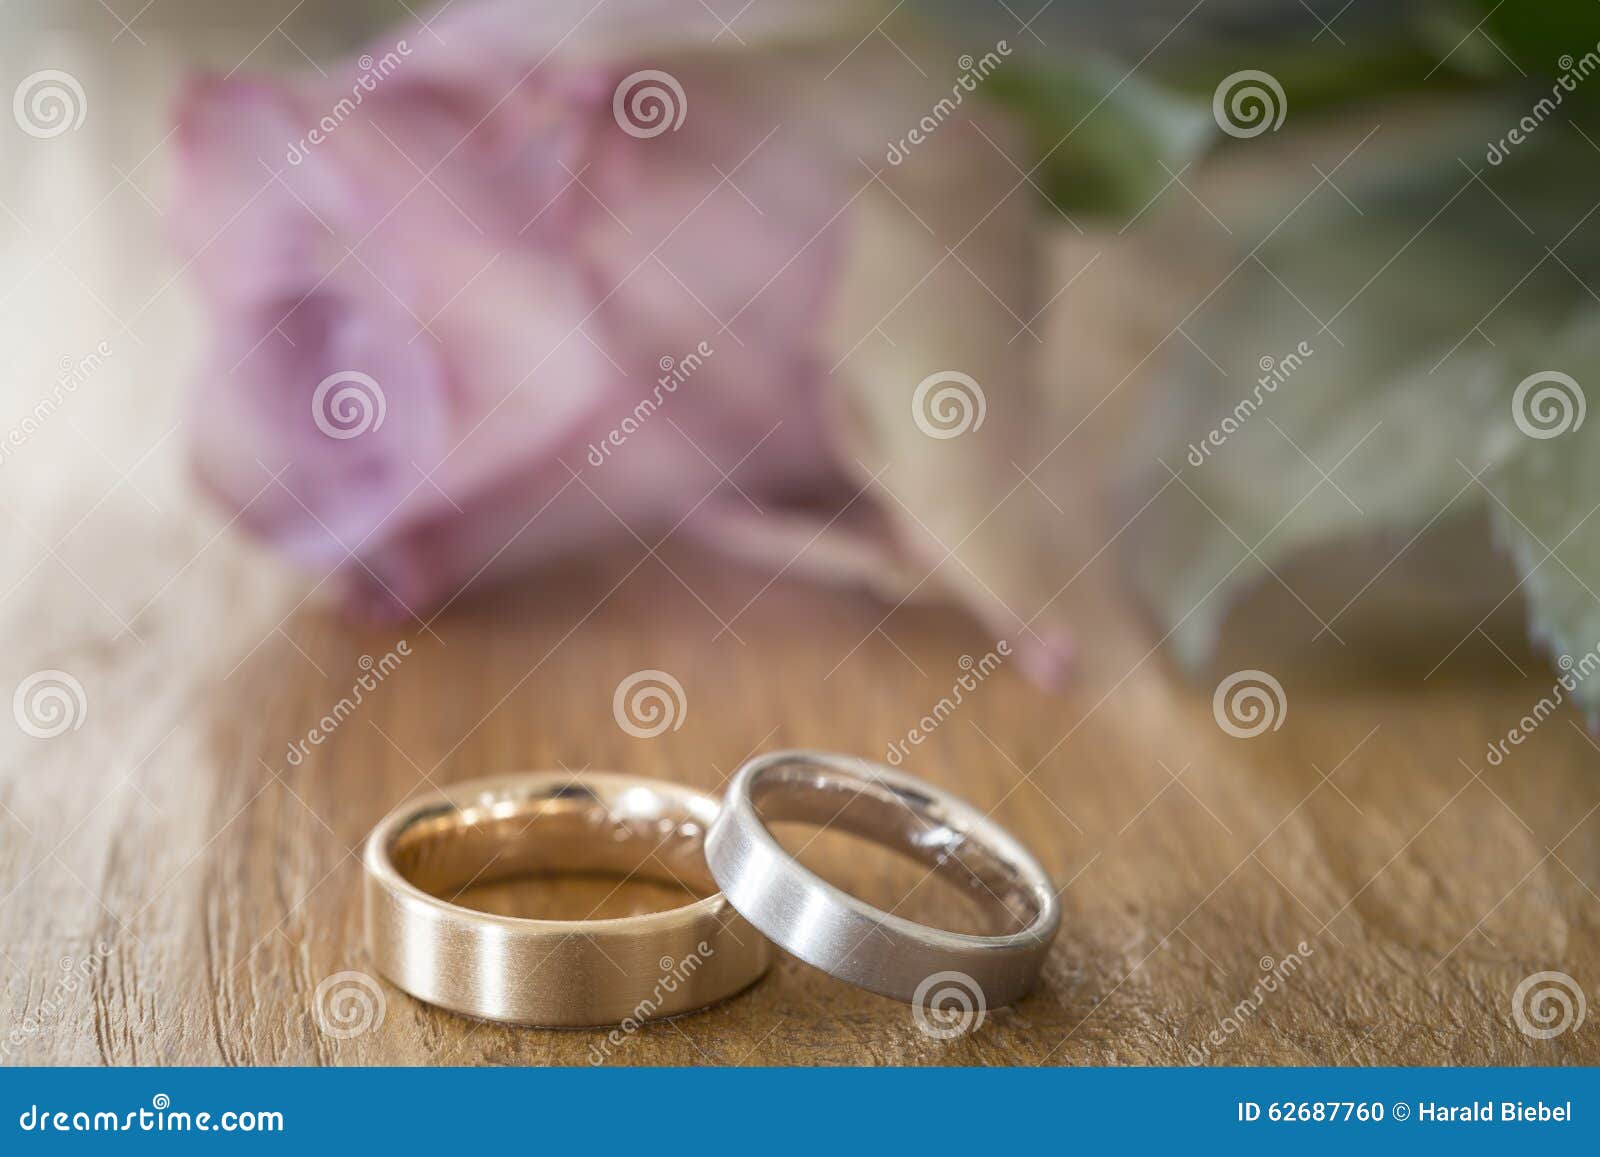 Two Wedding Rings on a Wooden Surface with Rose Stock Photo - Image of ...